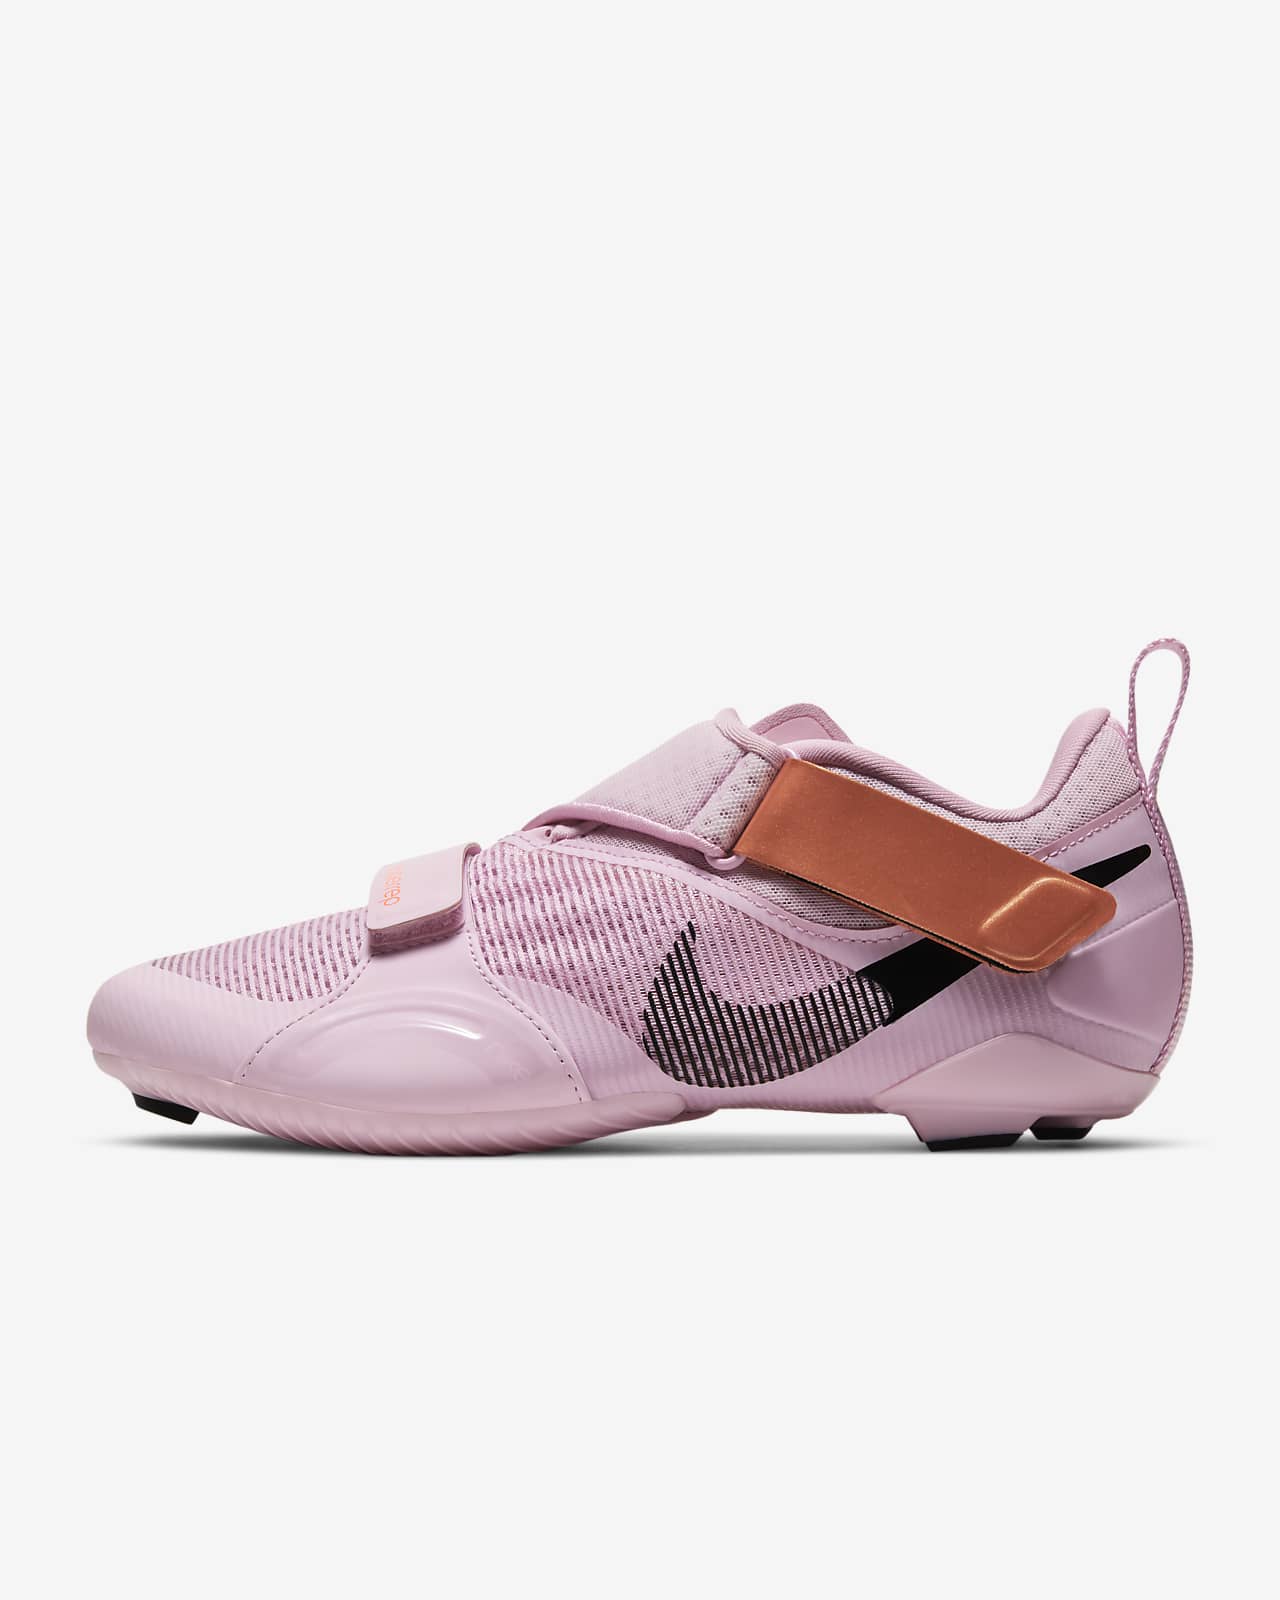 nike cycling shoes superrep